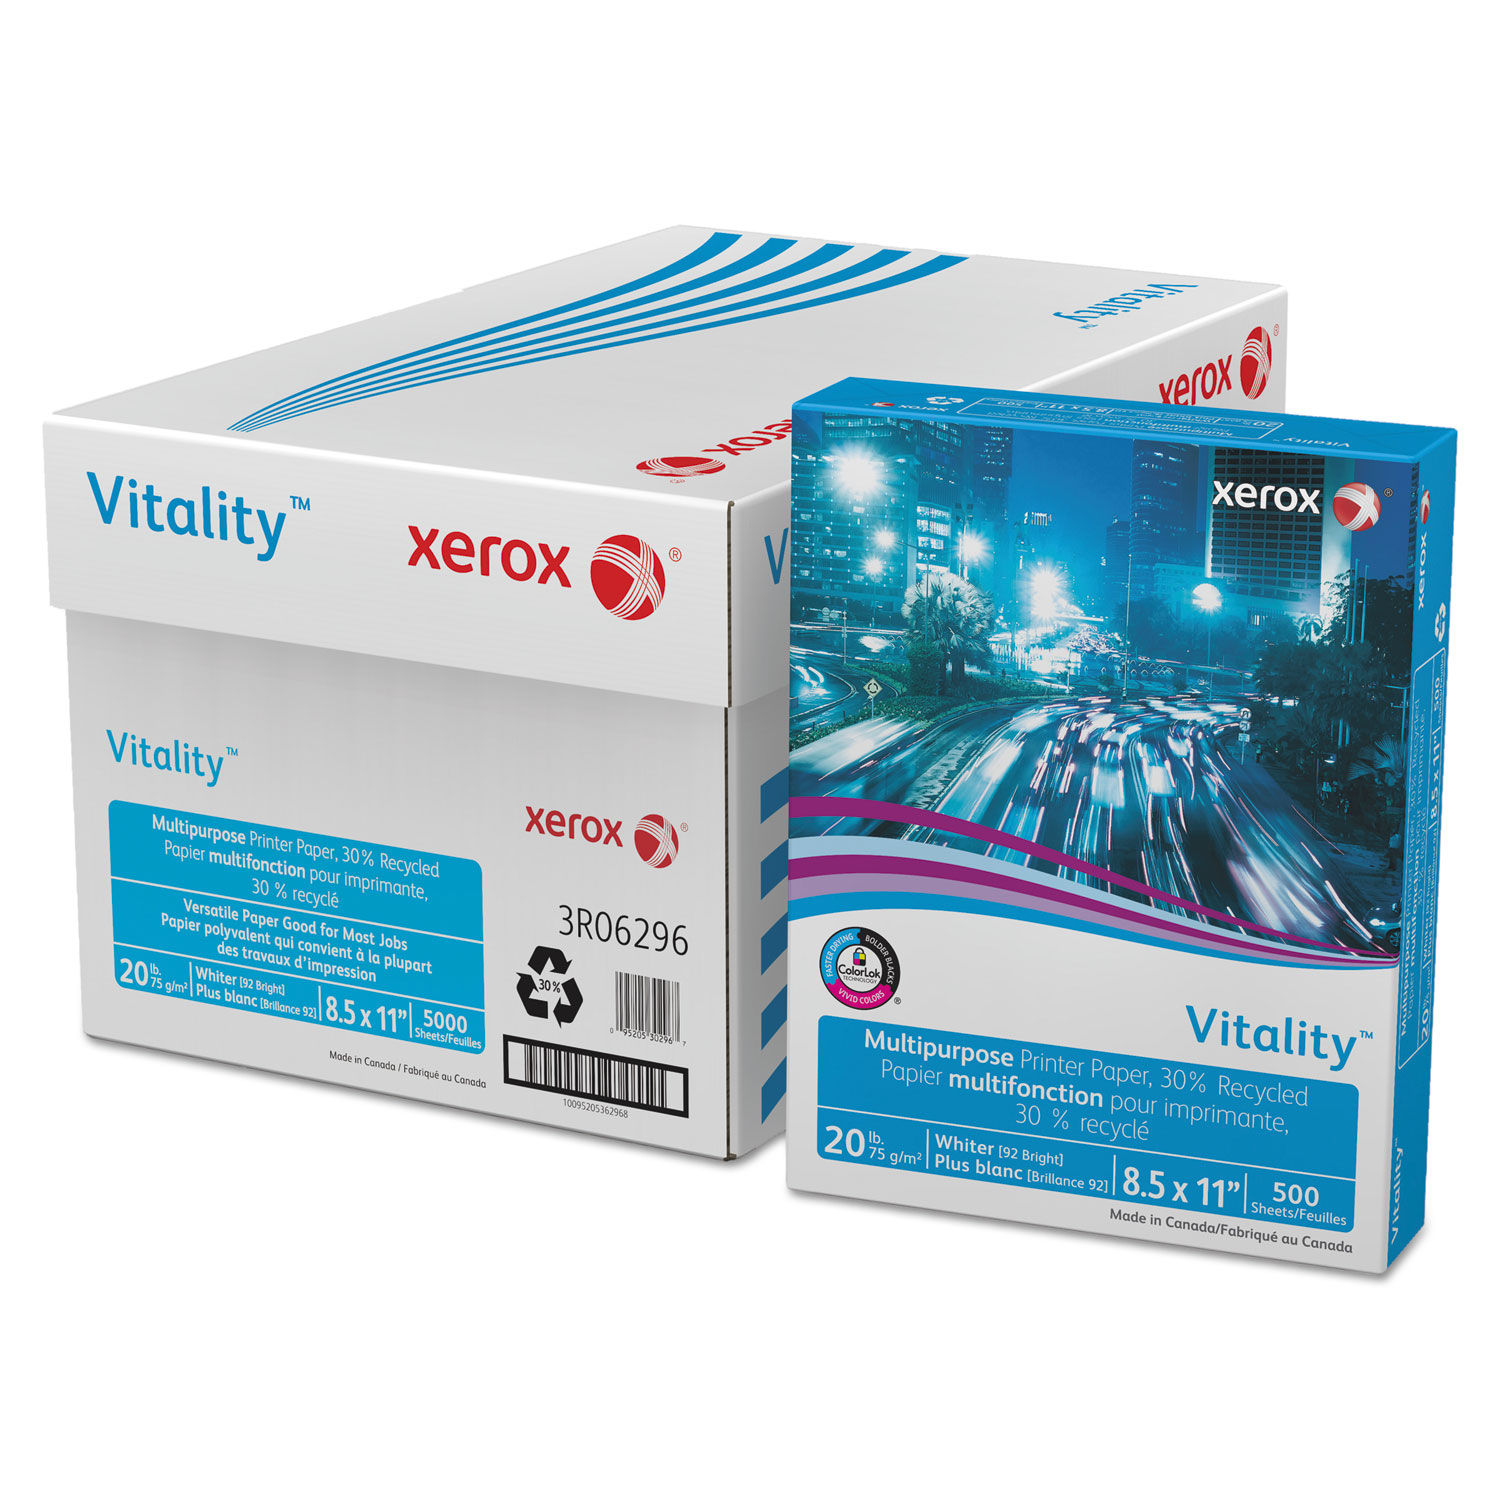 Vitality 30% Recycled Multipurpose Paper 92 Bright, 20 lb Bond Weight, 8.5 x 11, White, 500/Ream